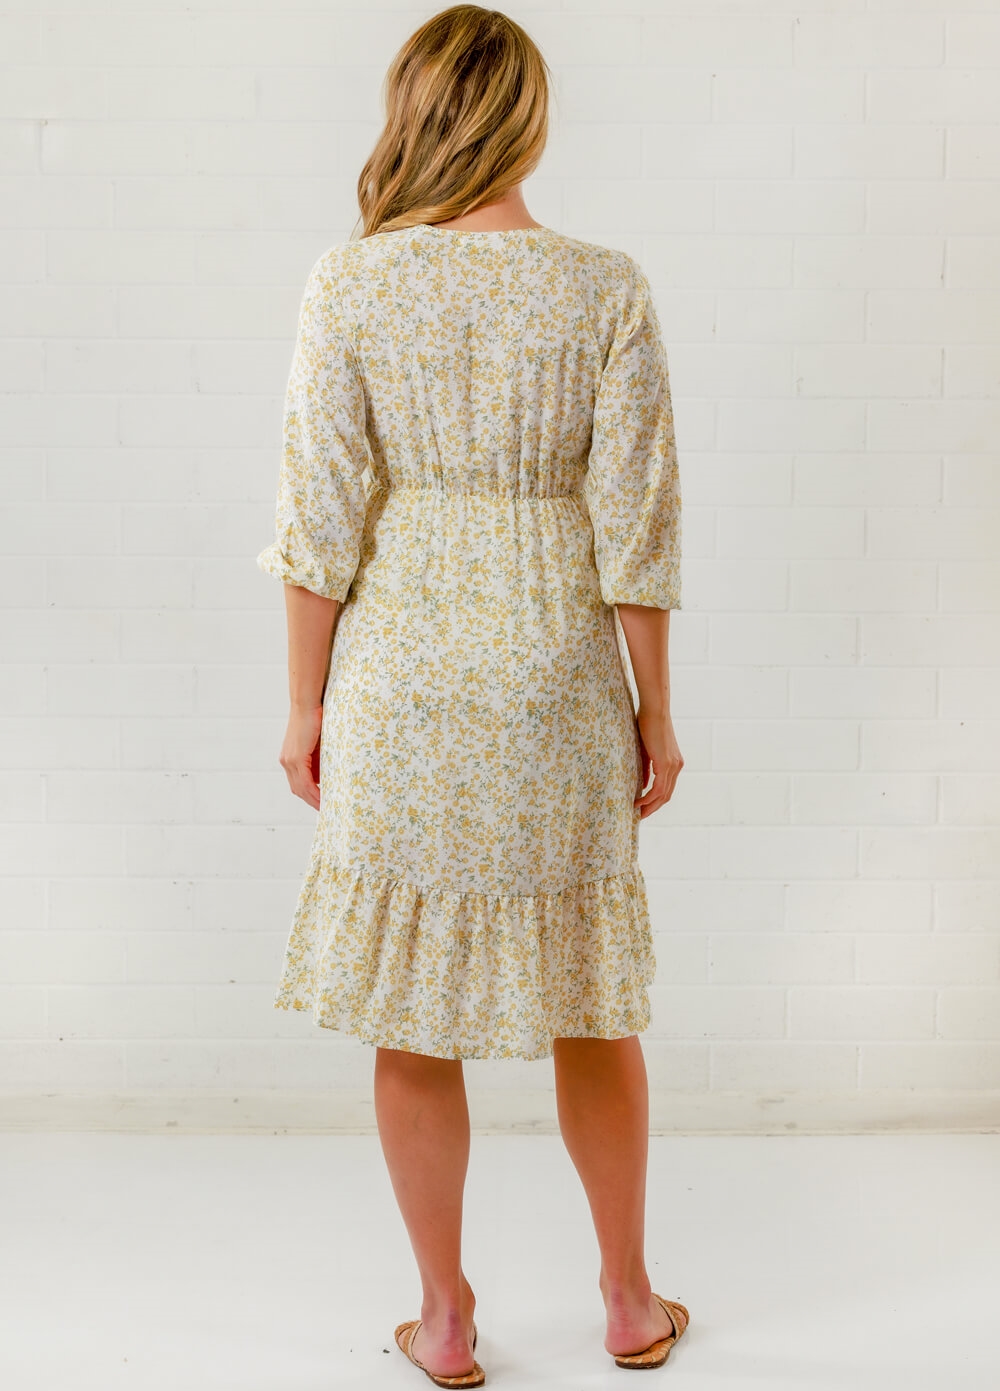 Lait & Co - Etiennette Maternity Dress in Yellow Floral